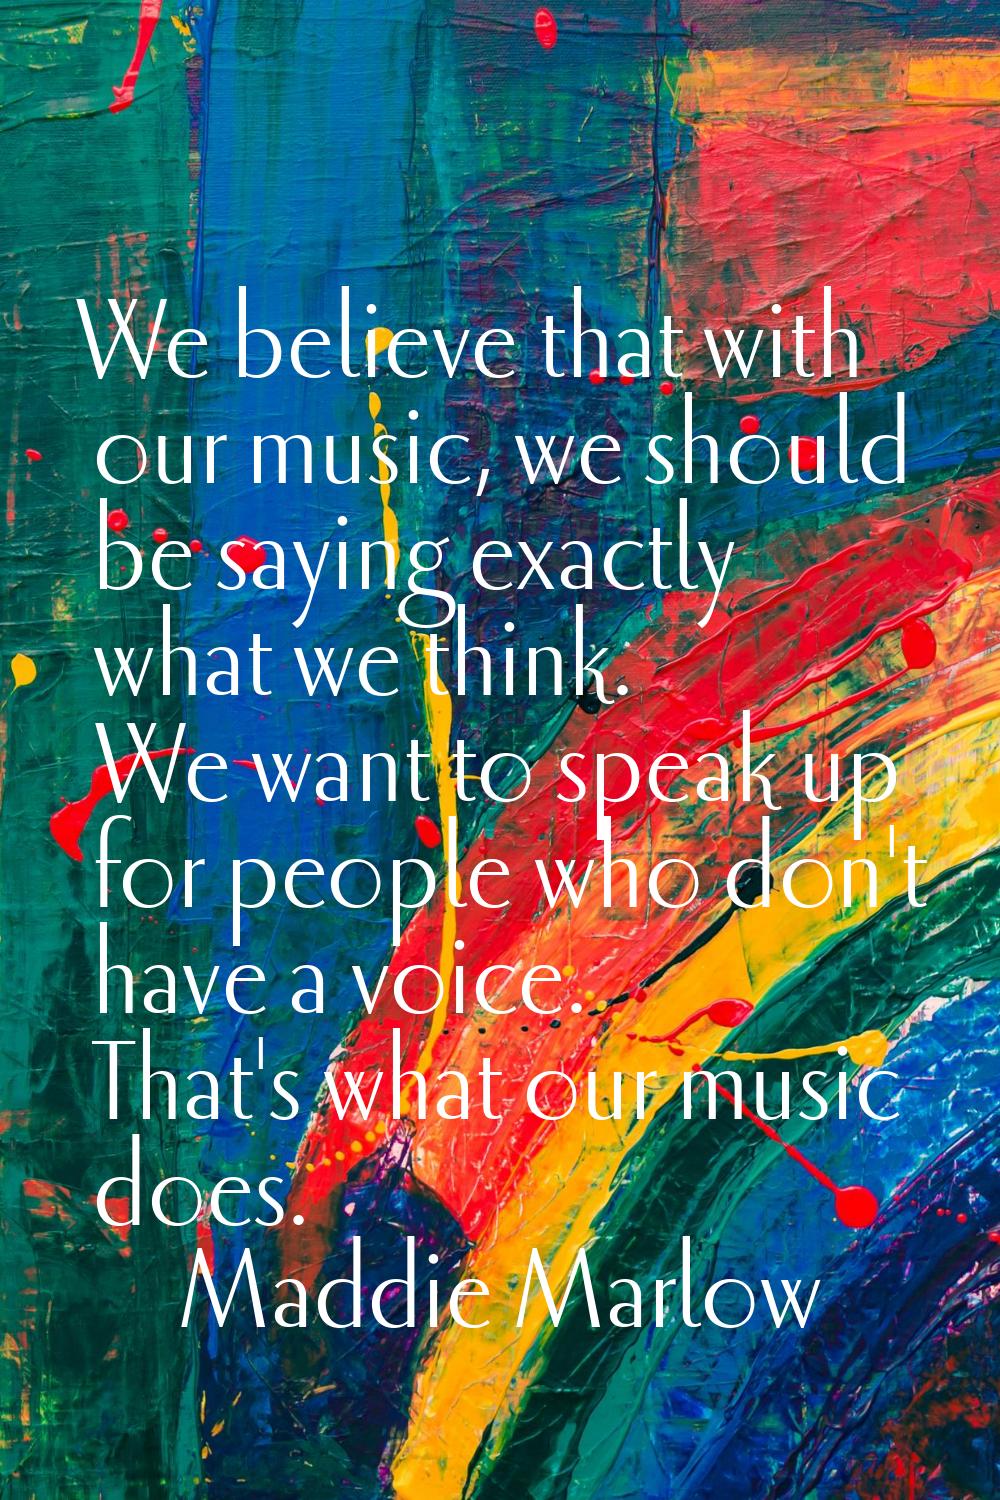 We believe that with our music, we should be saying exactly what we think. We want to speak up for 